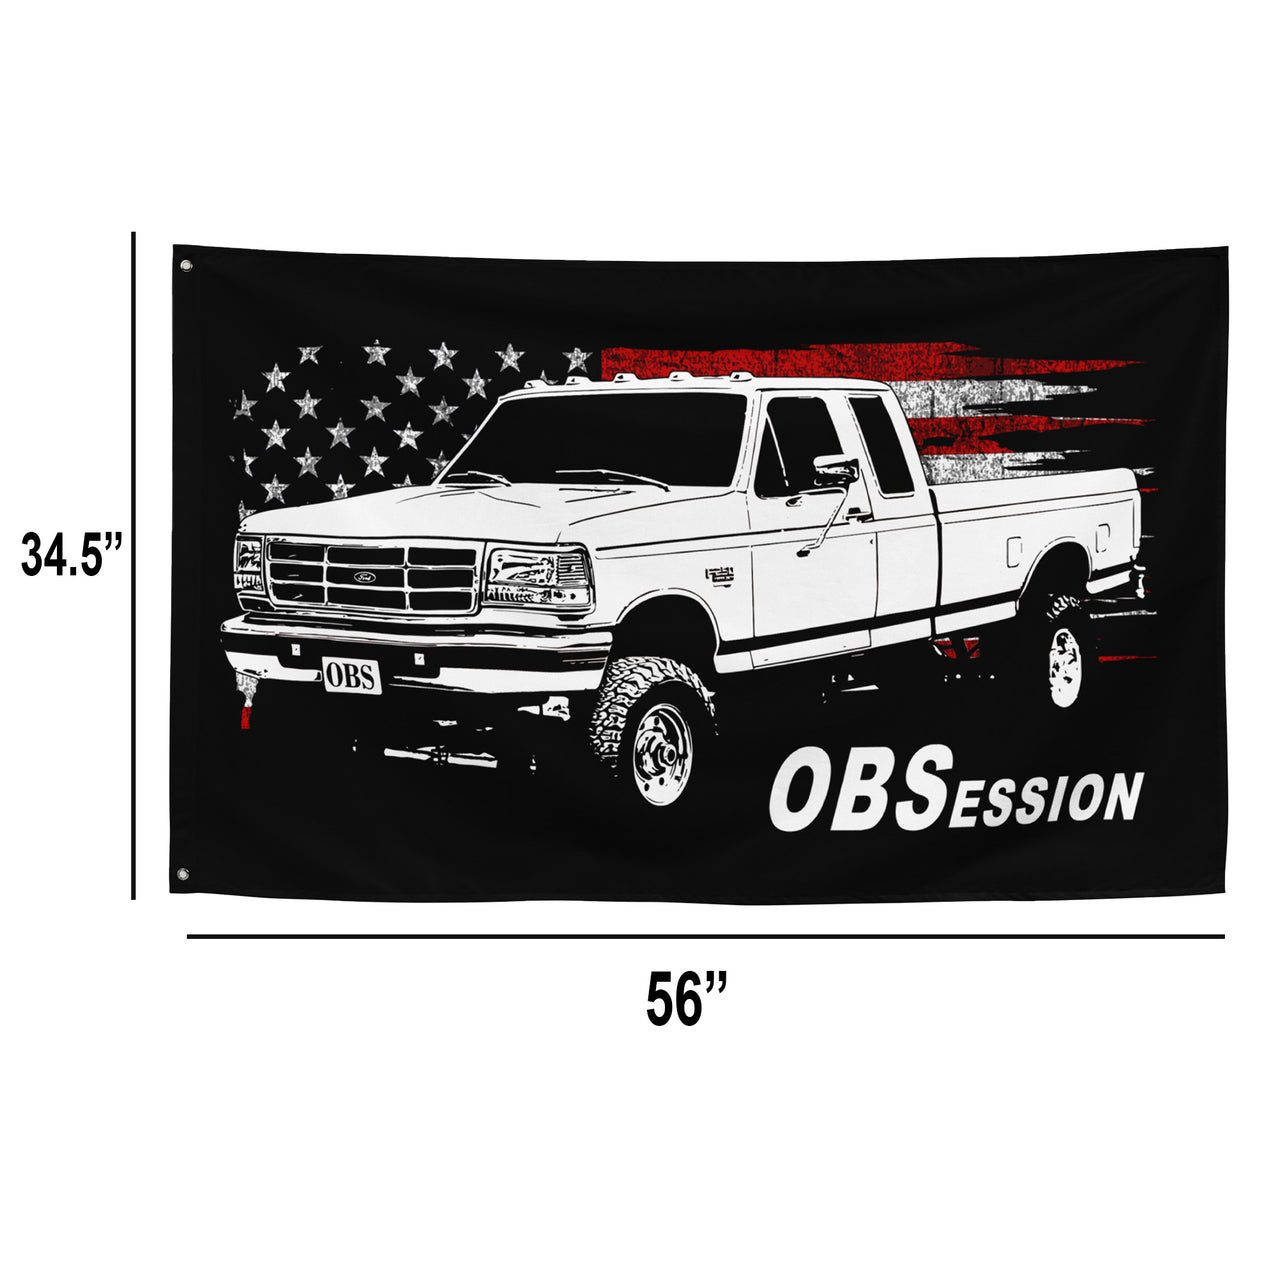 OBS Extended Cab Truck Wall Flag with dimensions